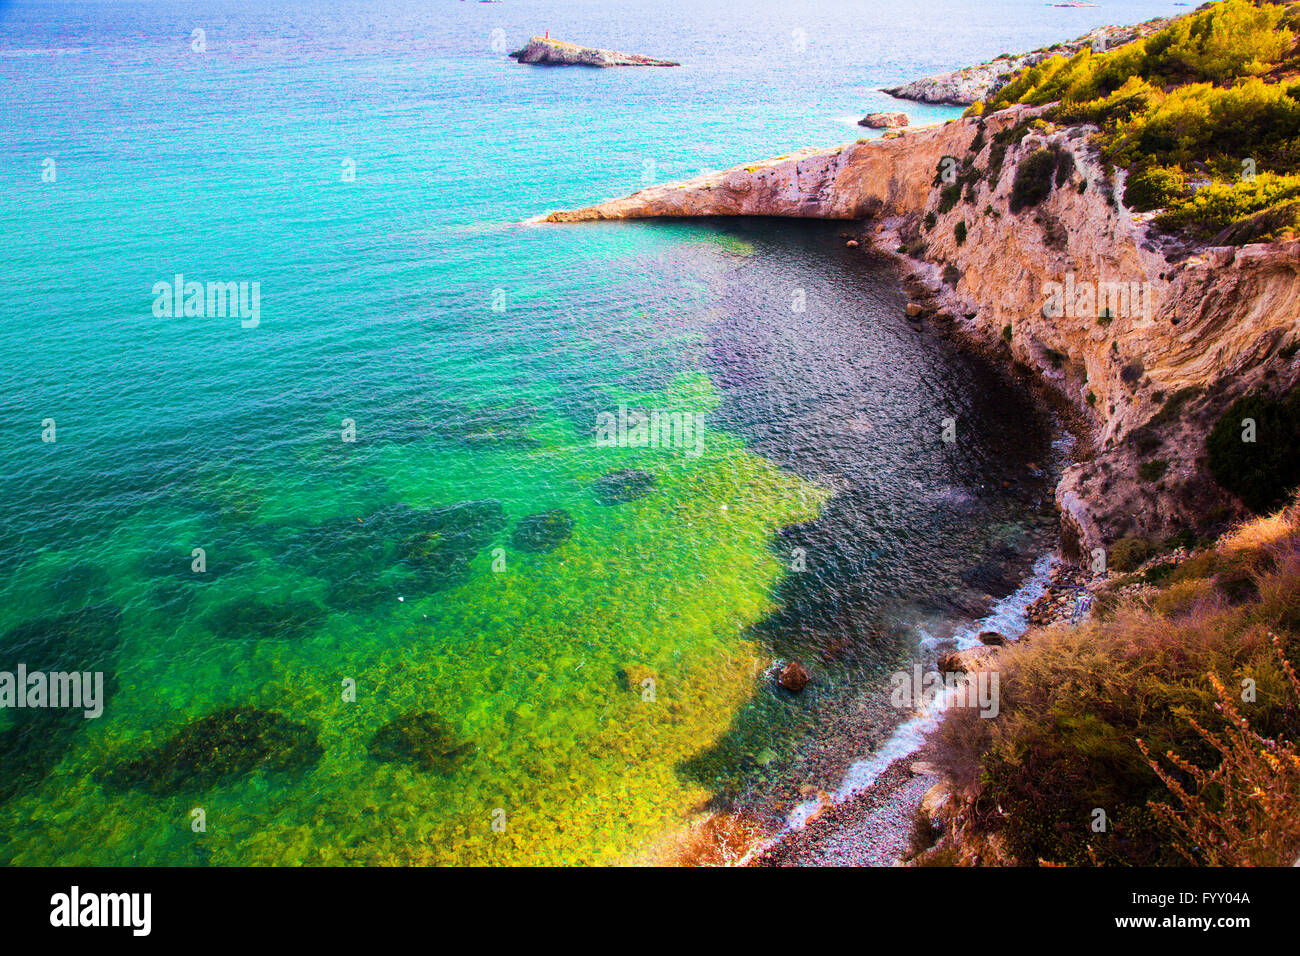 Clear water of the sea, Ibiza, Spain Stock Photo